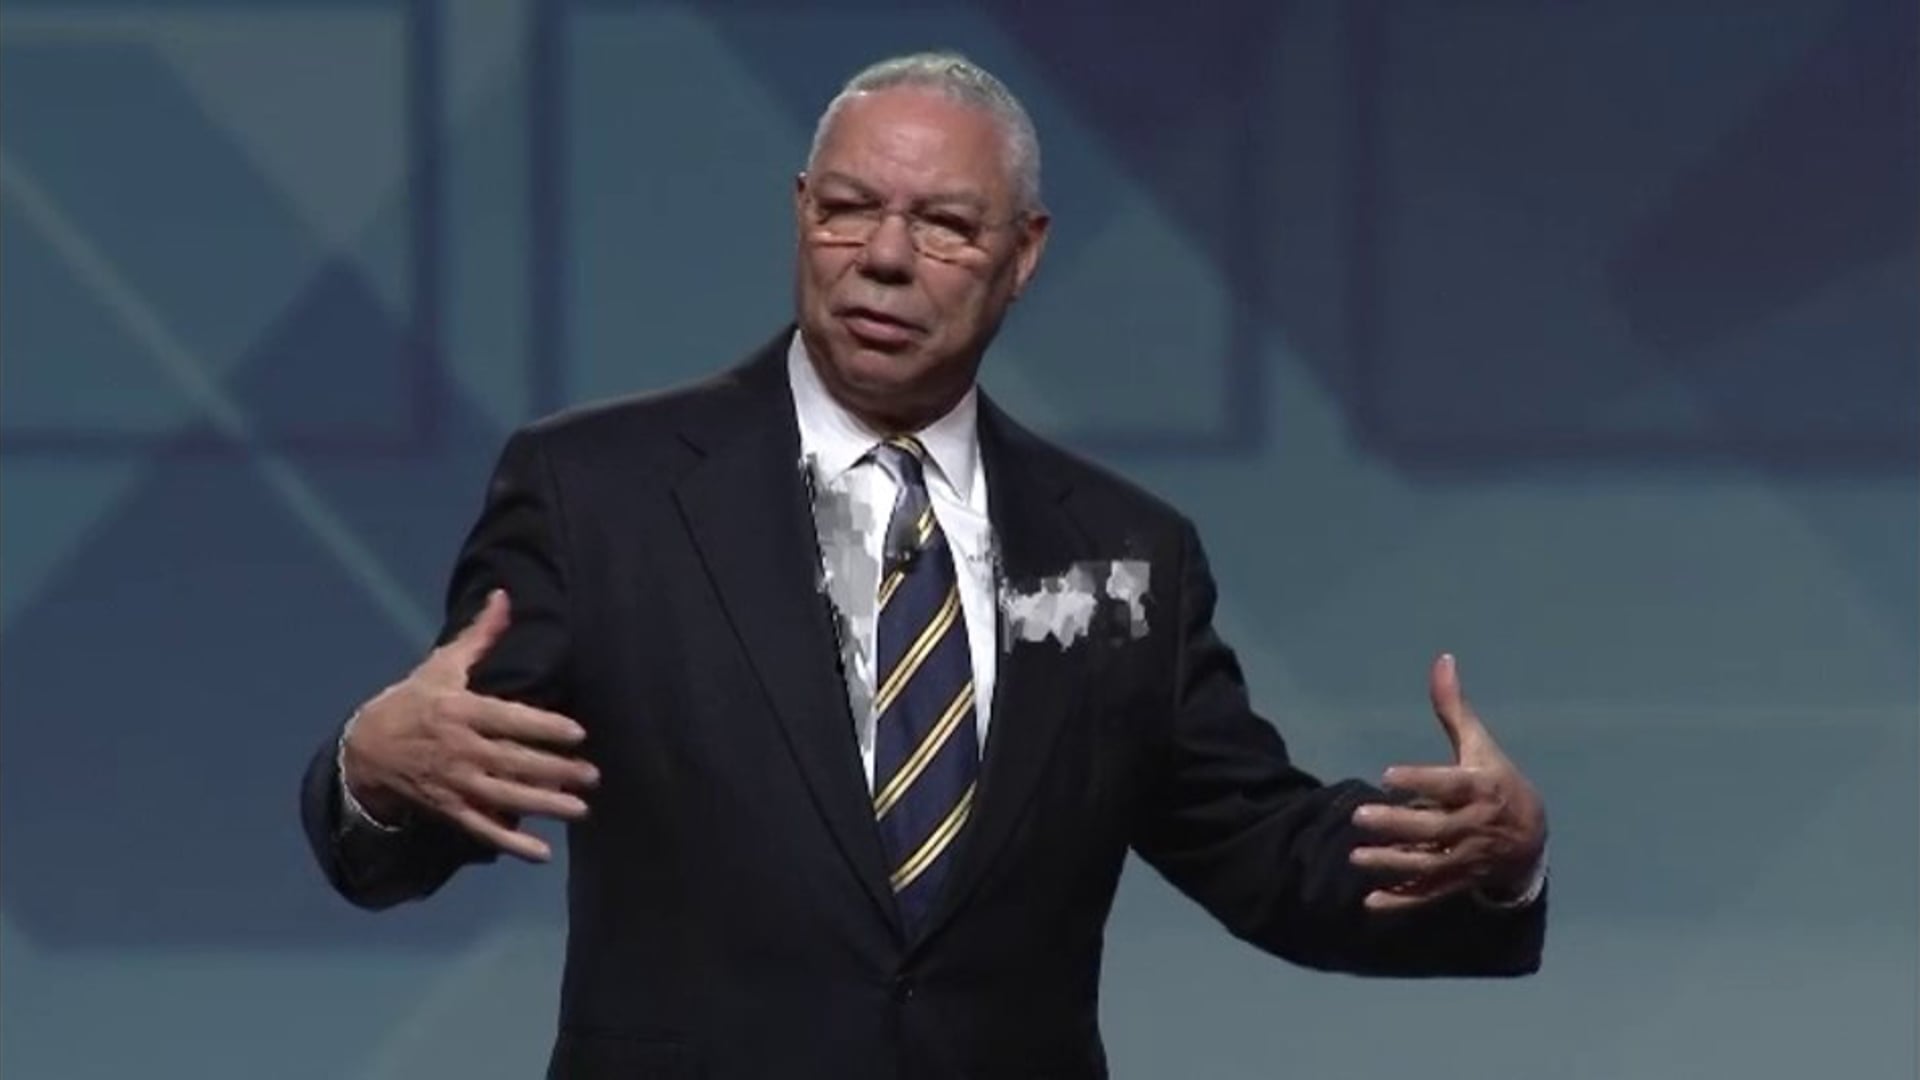 General Colin Powell: Life Long Learning is Everywhere @ Elliott Masie's Learning 2012